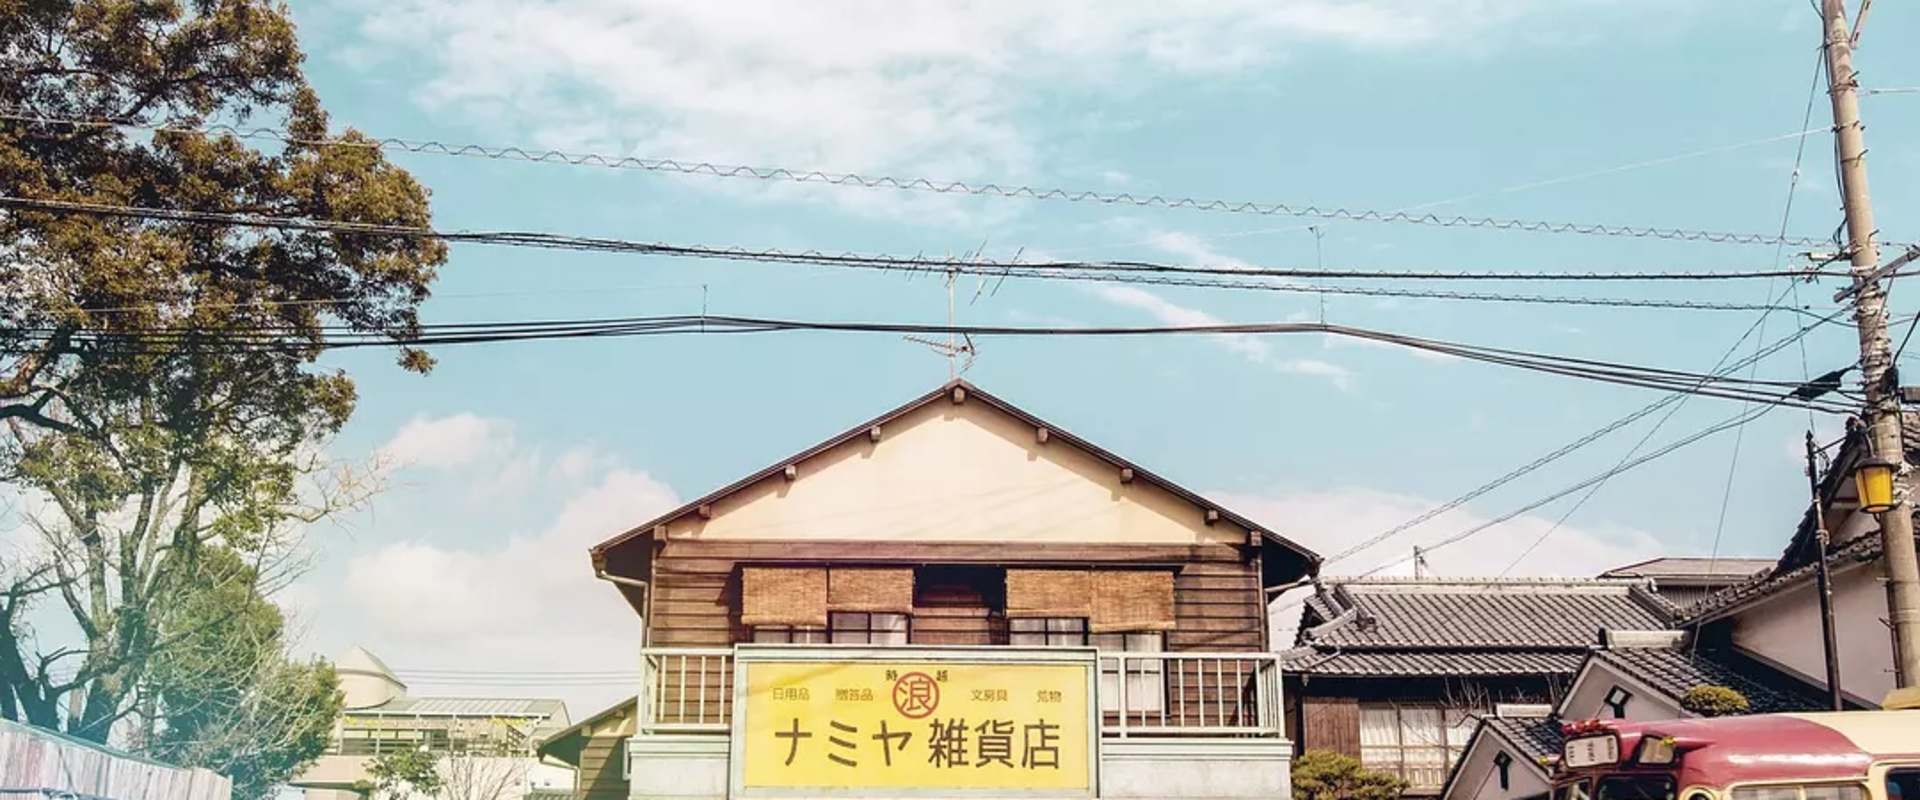 The Miracles of the Namiya General Store background 1